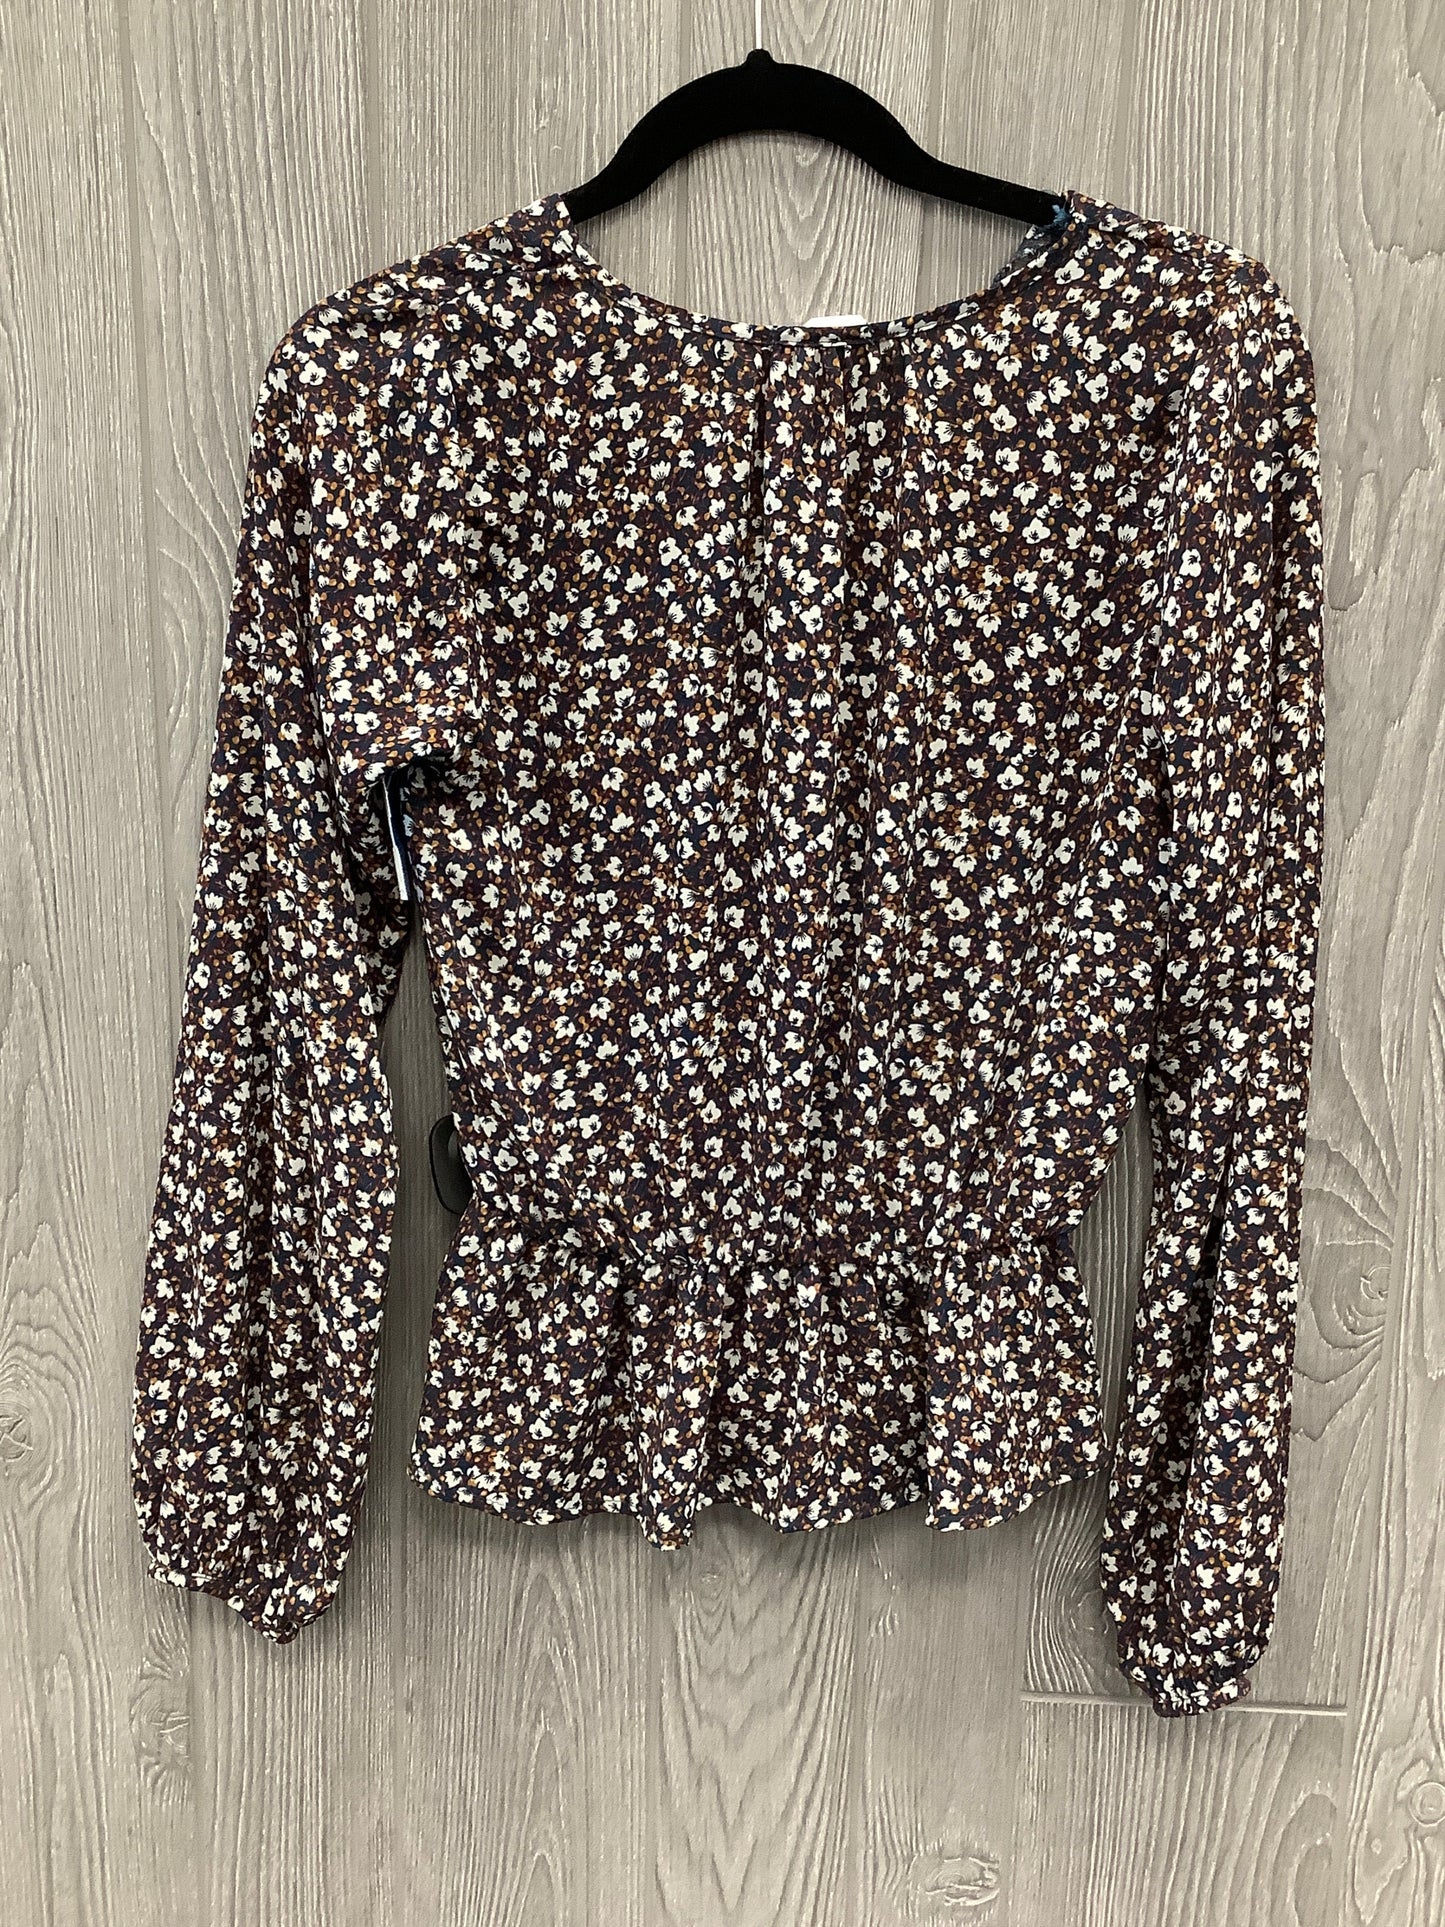 Blouse Long Sleeve By Sienna Sky  Size: S